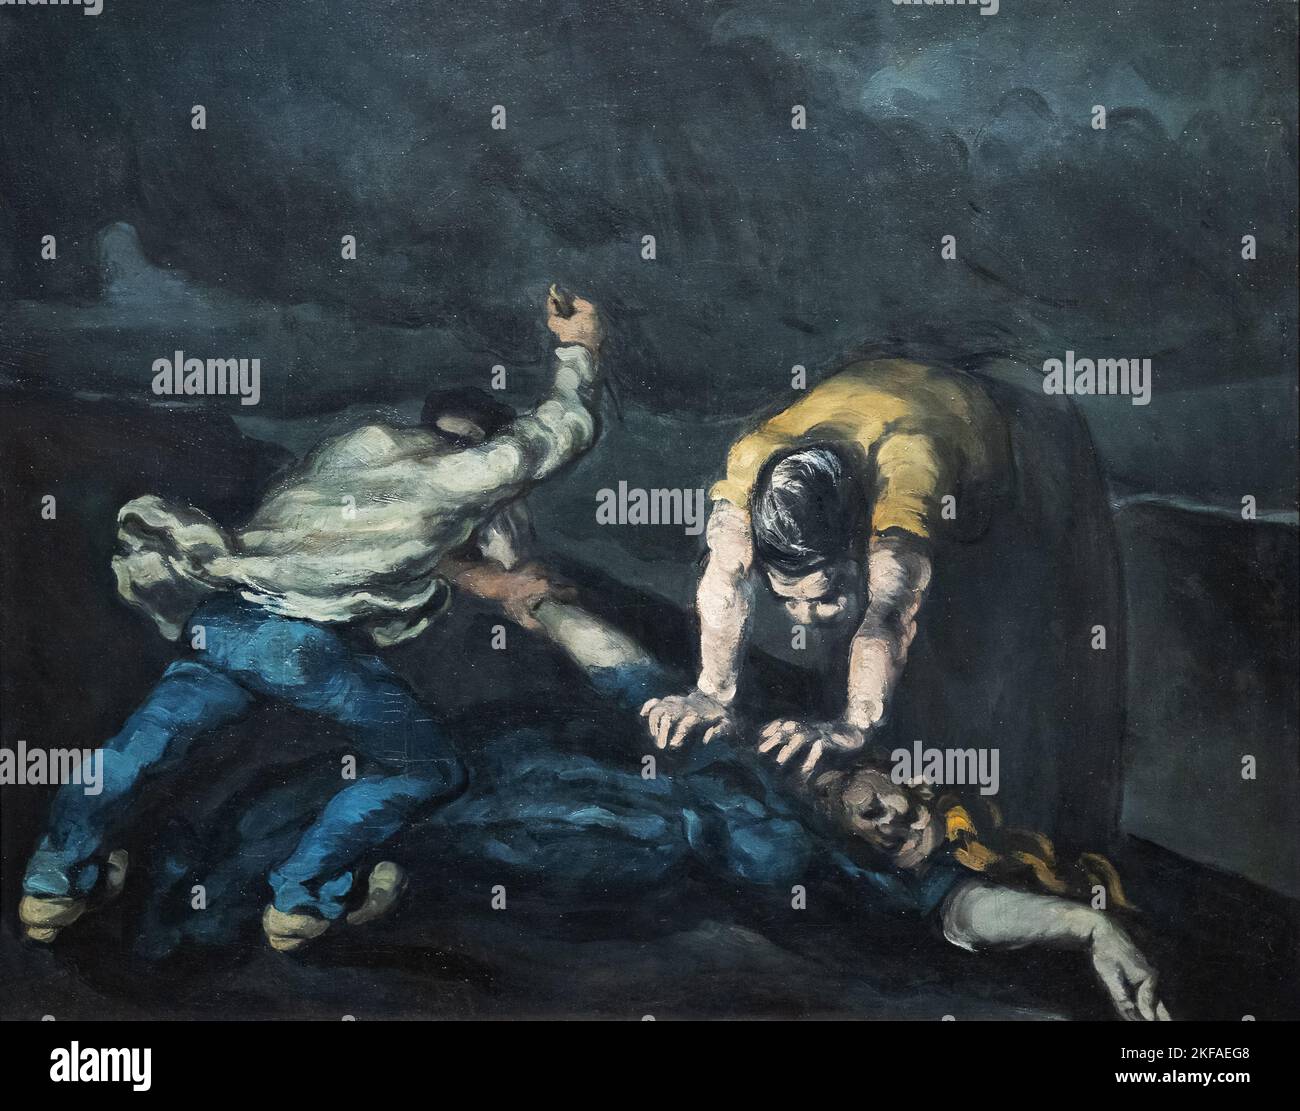 Paul Cezanne painting - The Murder c1870; Post Impressionist 19th century paintings Stock Photo